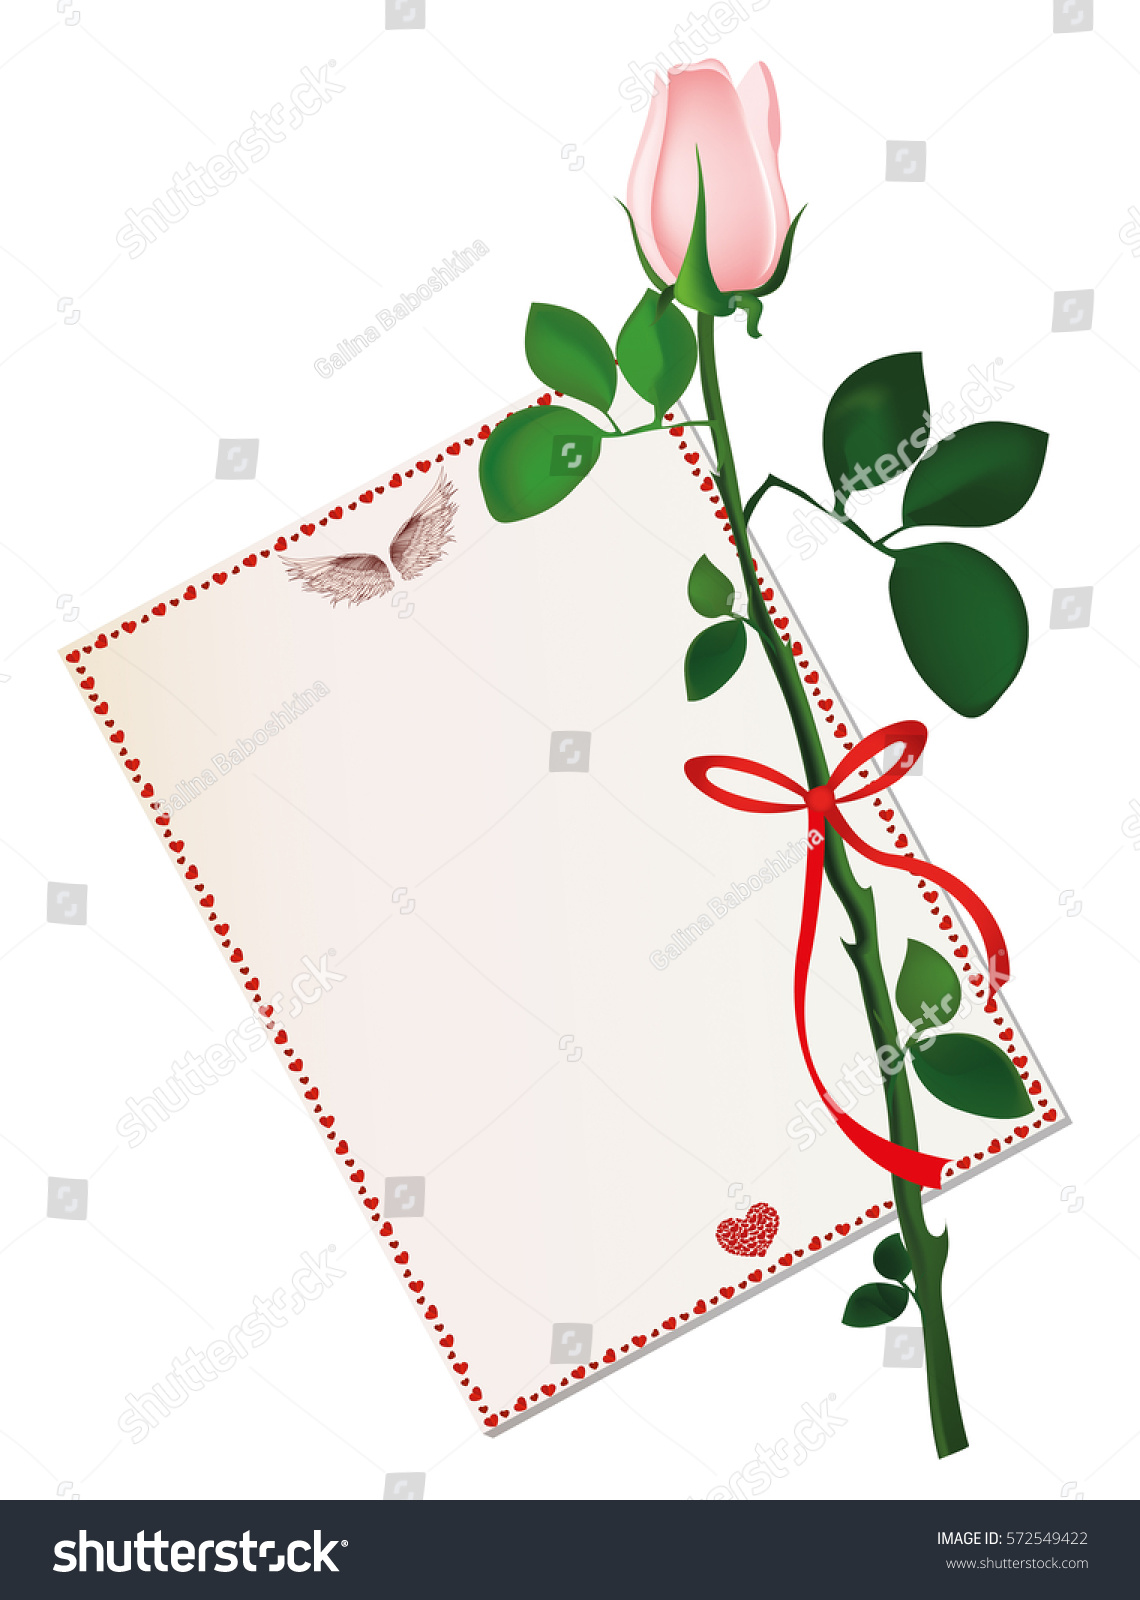 one white flower red bow ribbon stock vector (royalty free